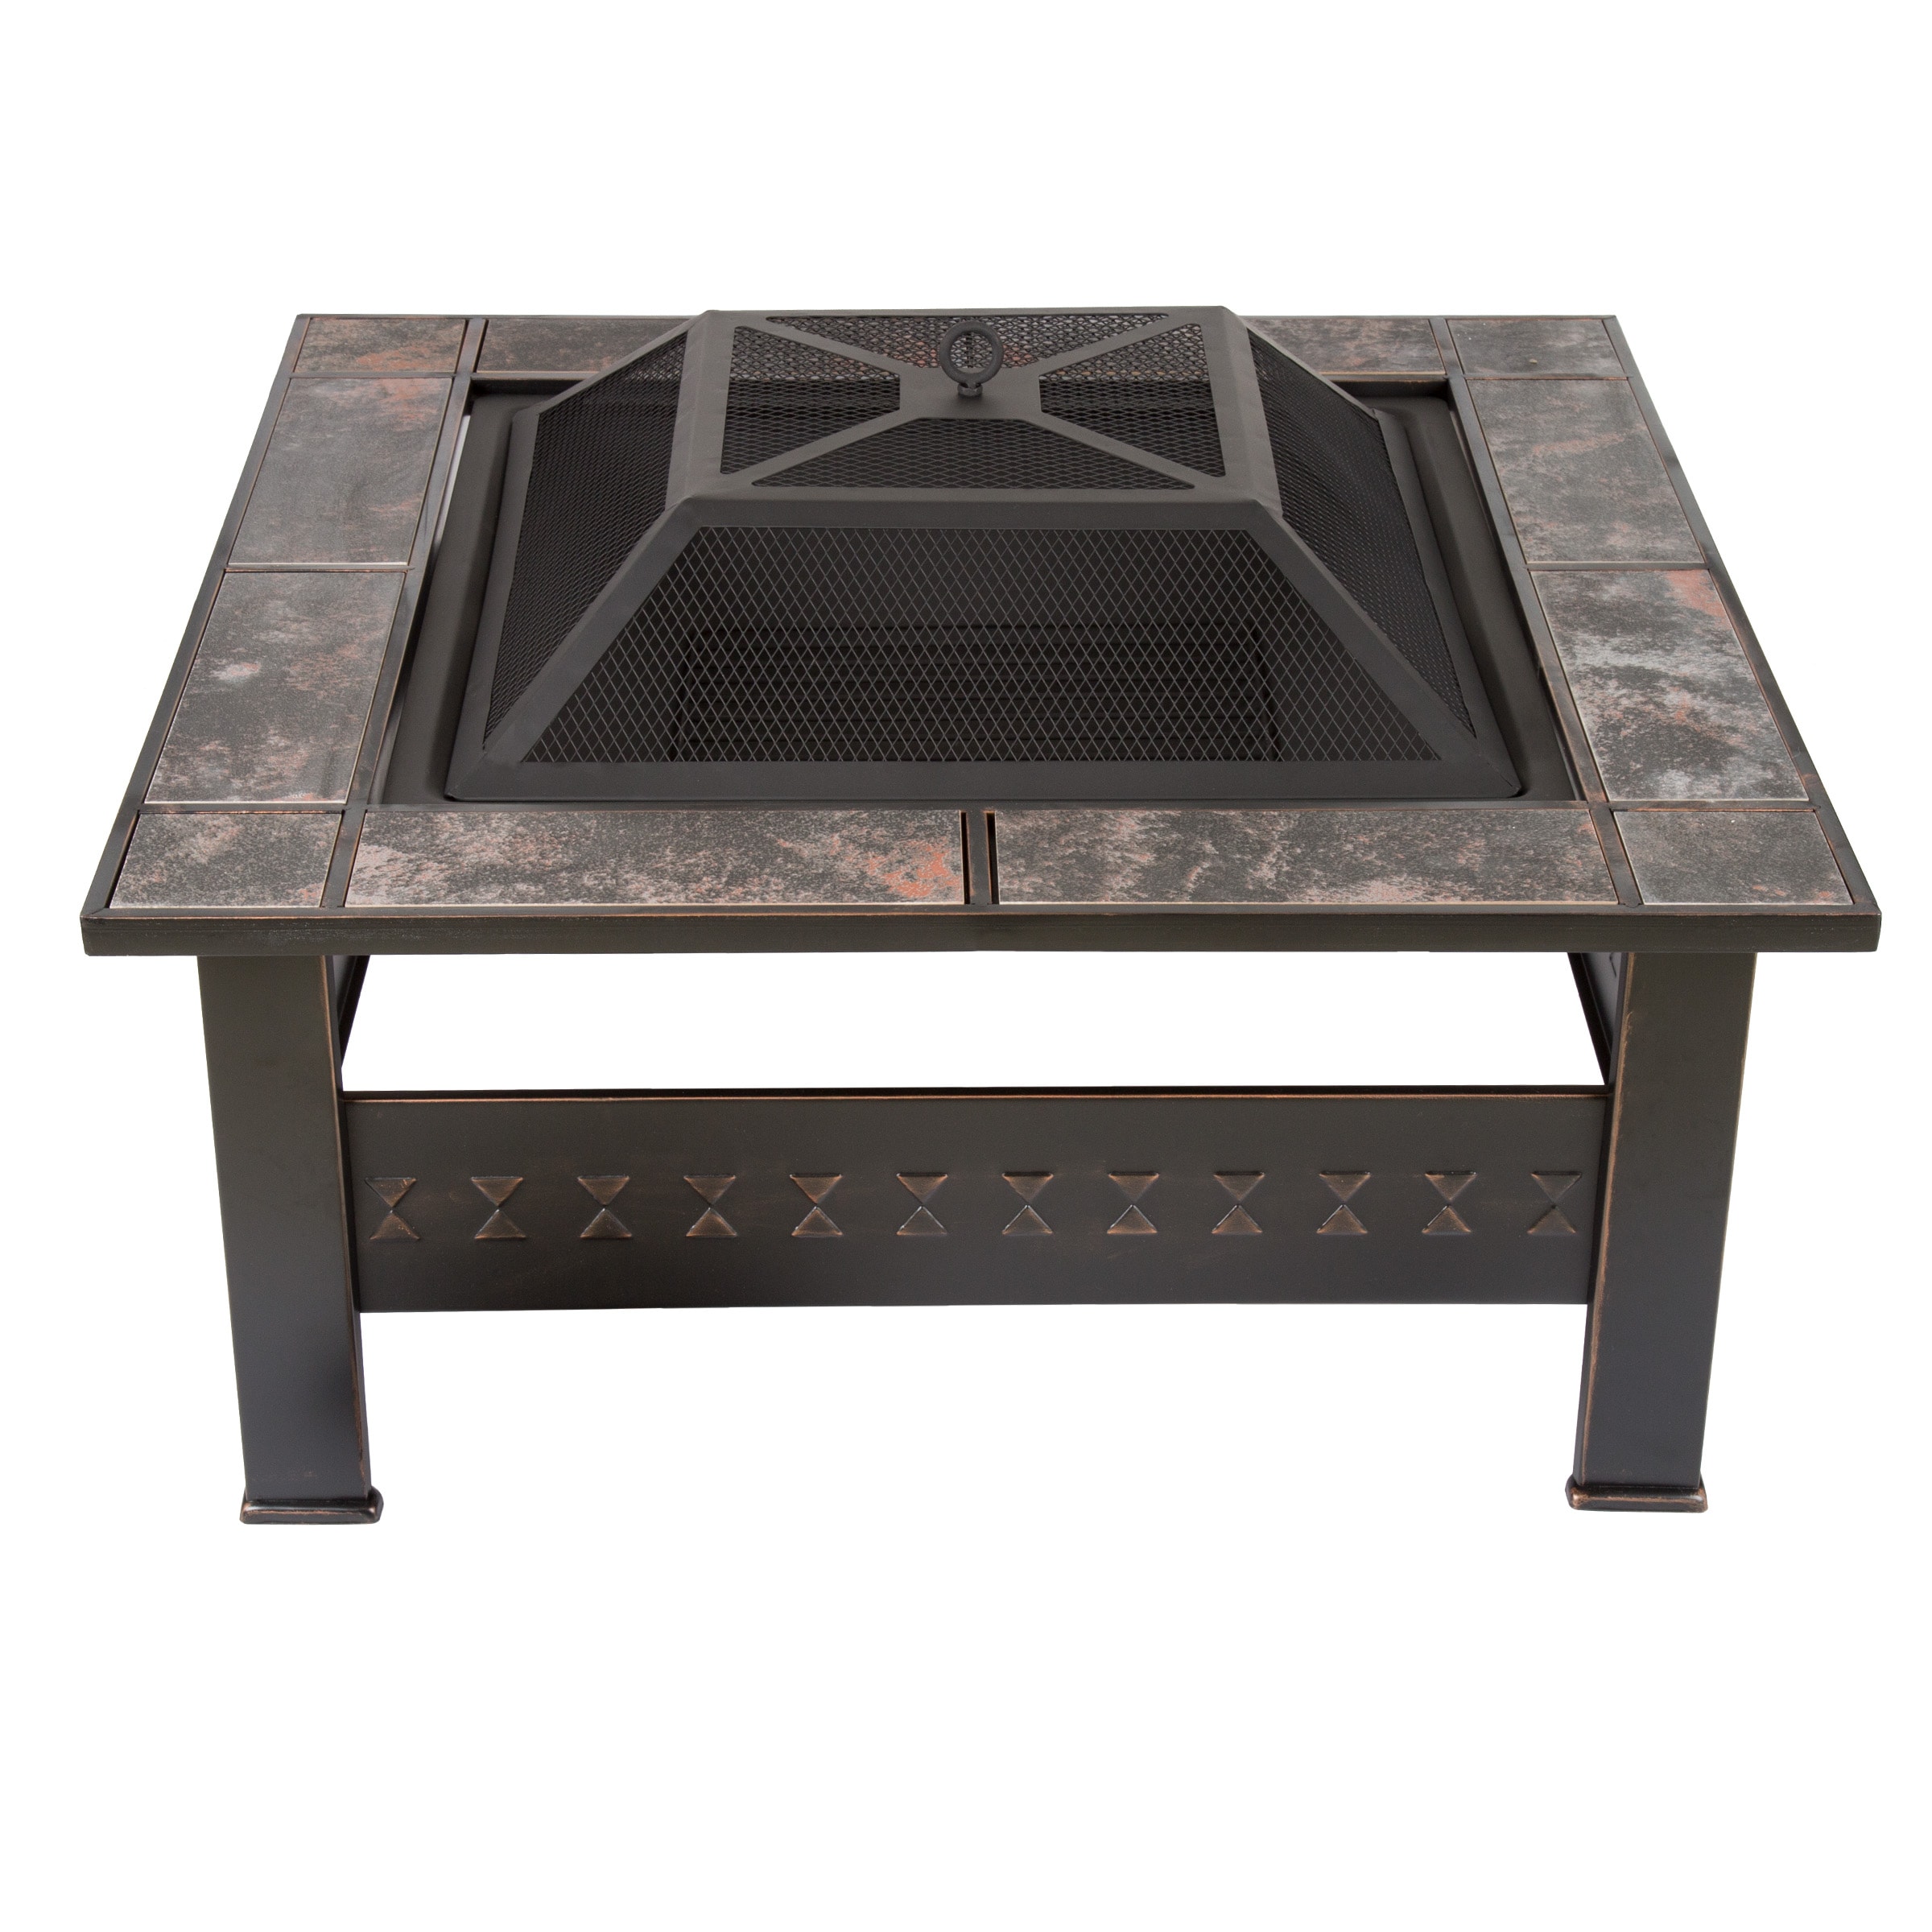 Brown Steel Wood Burning Fire Pit, 30 Inch Square Fire Pit